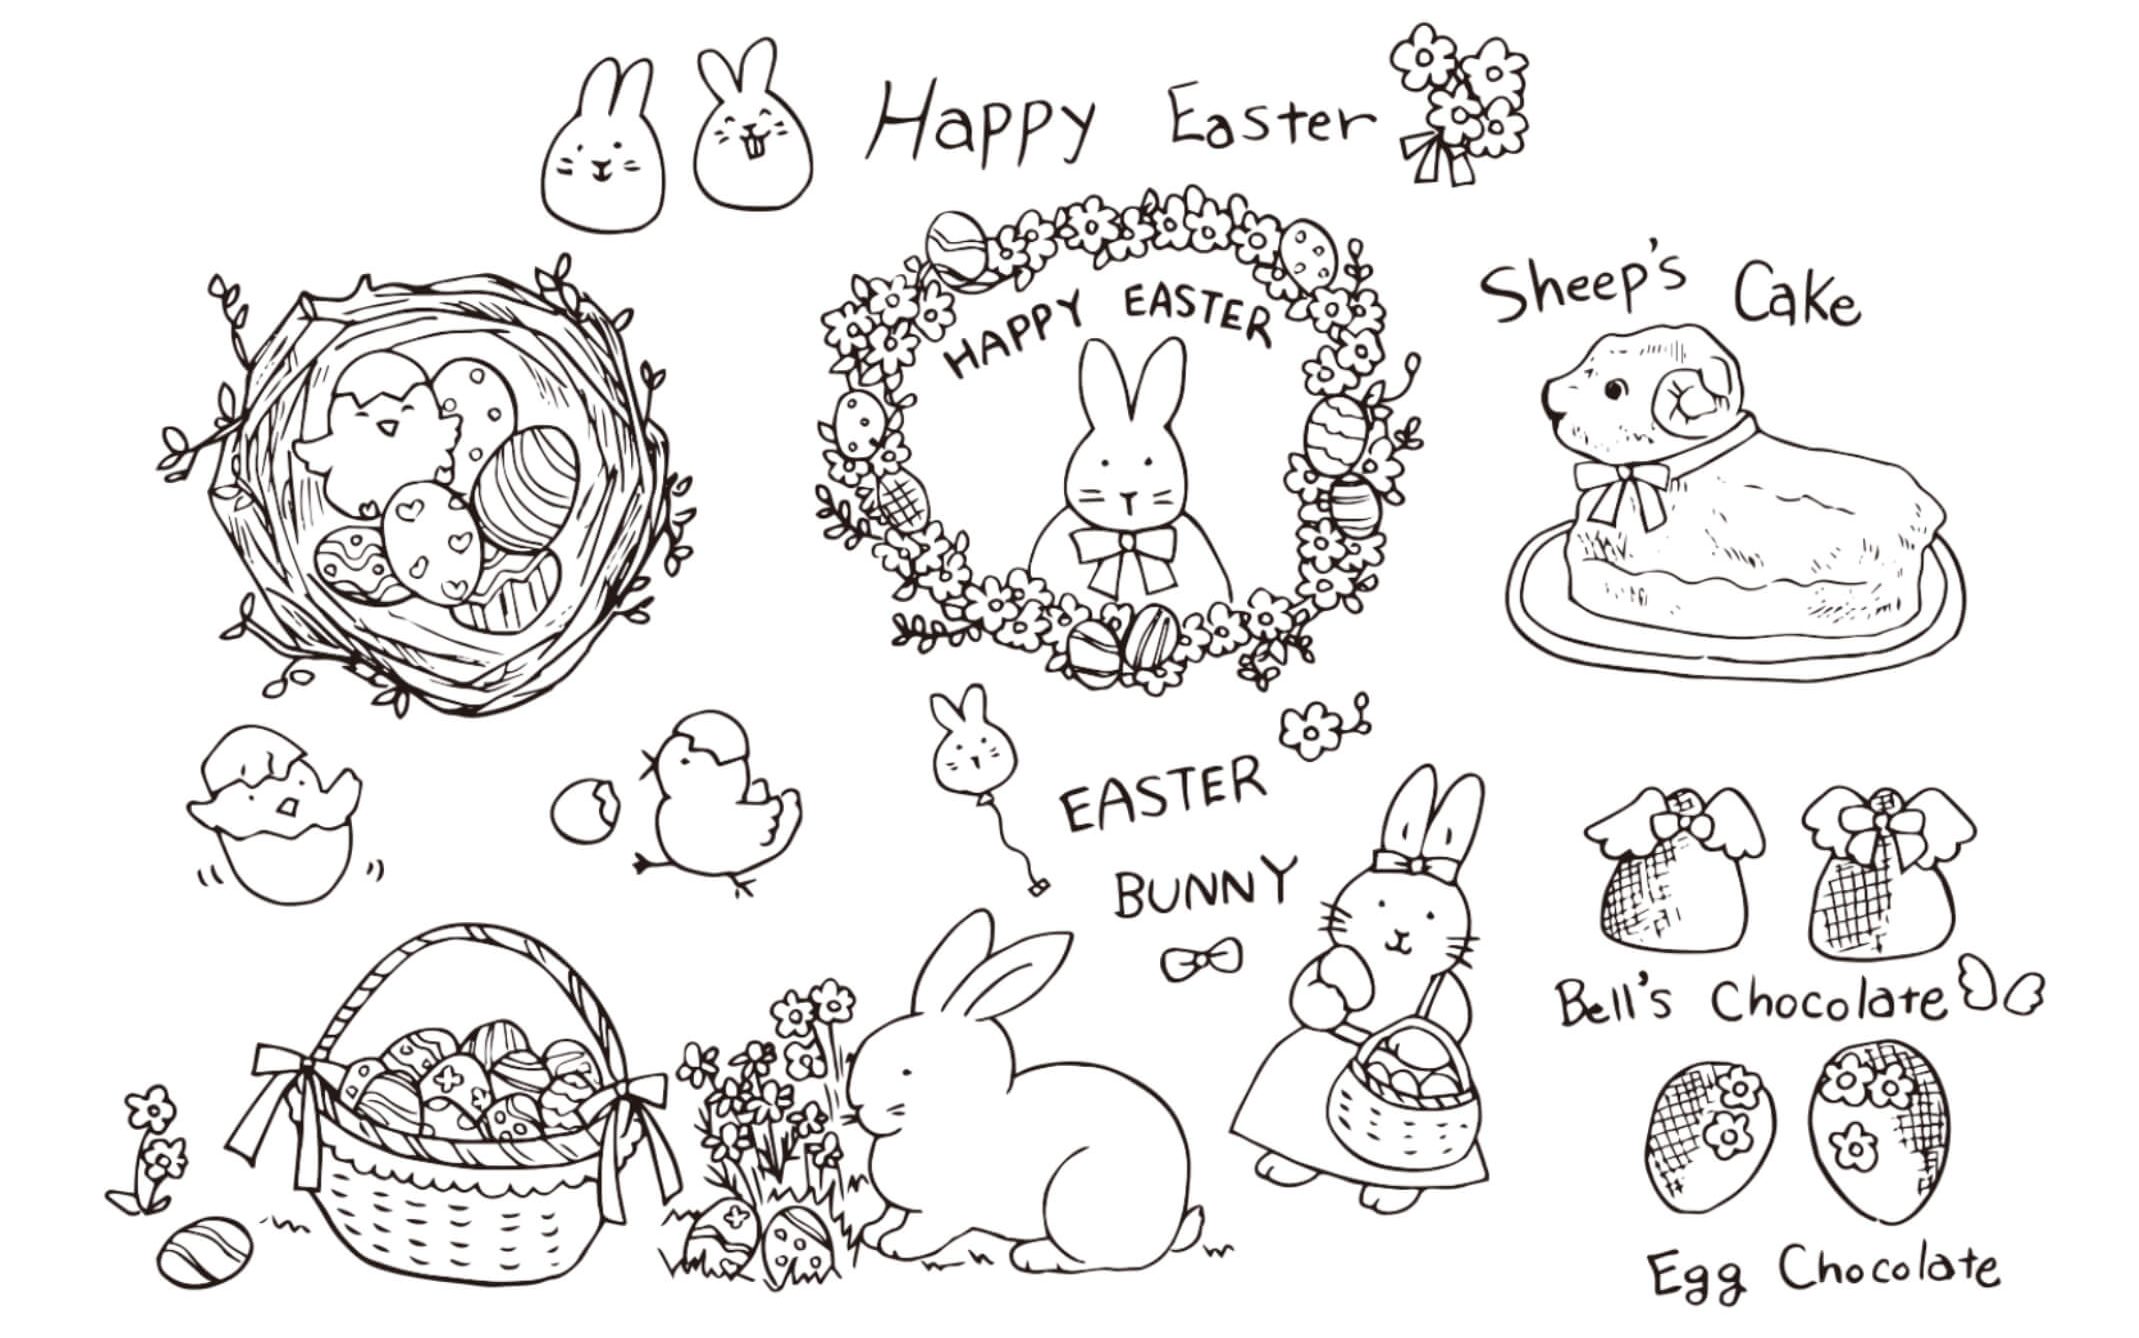 10+ Easter Bunny Clipart and Cute Easter Images For Free Download